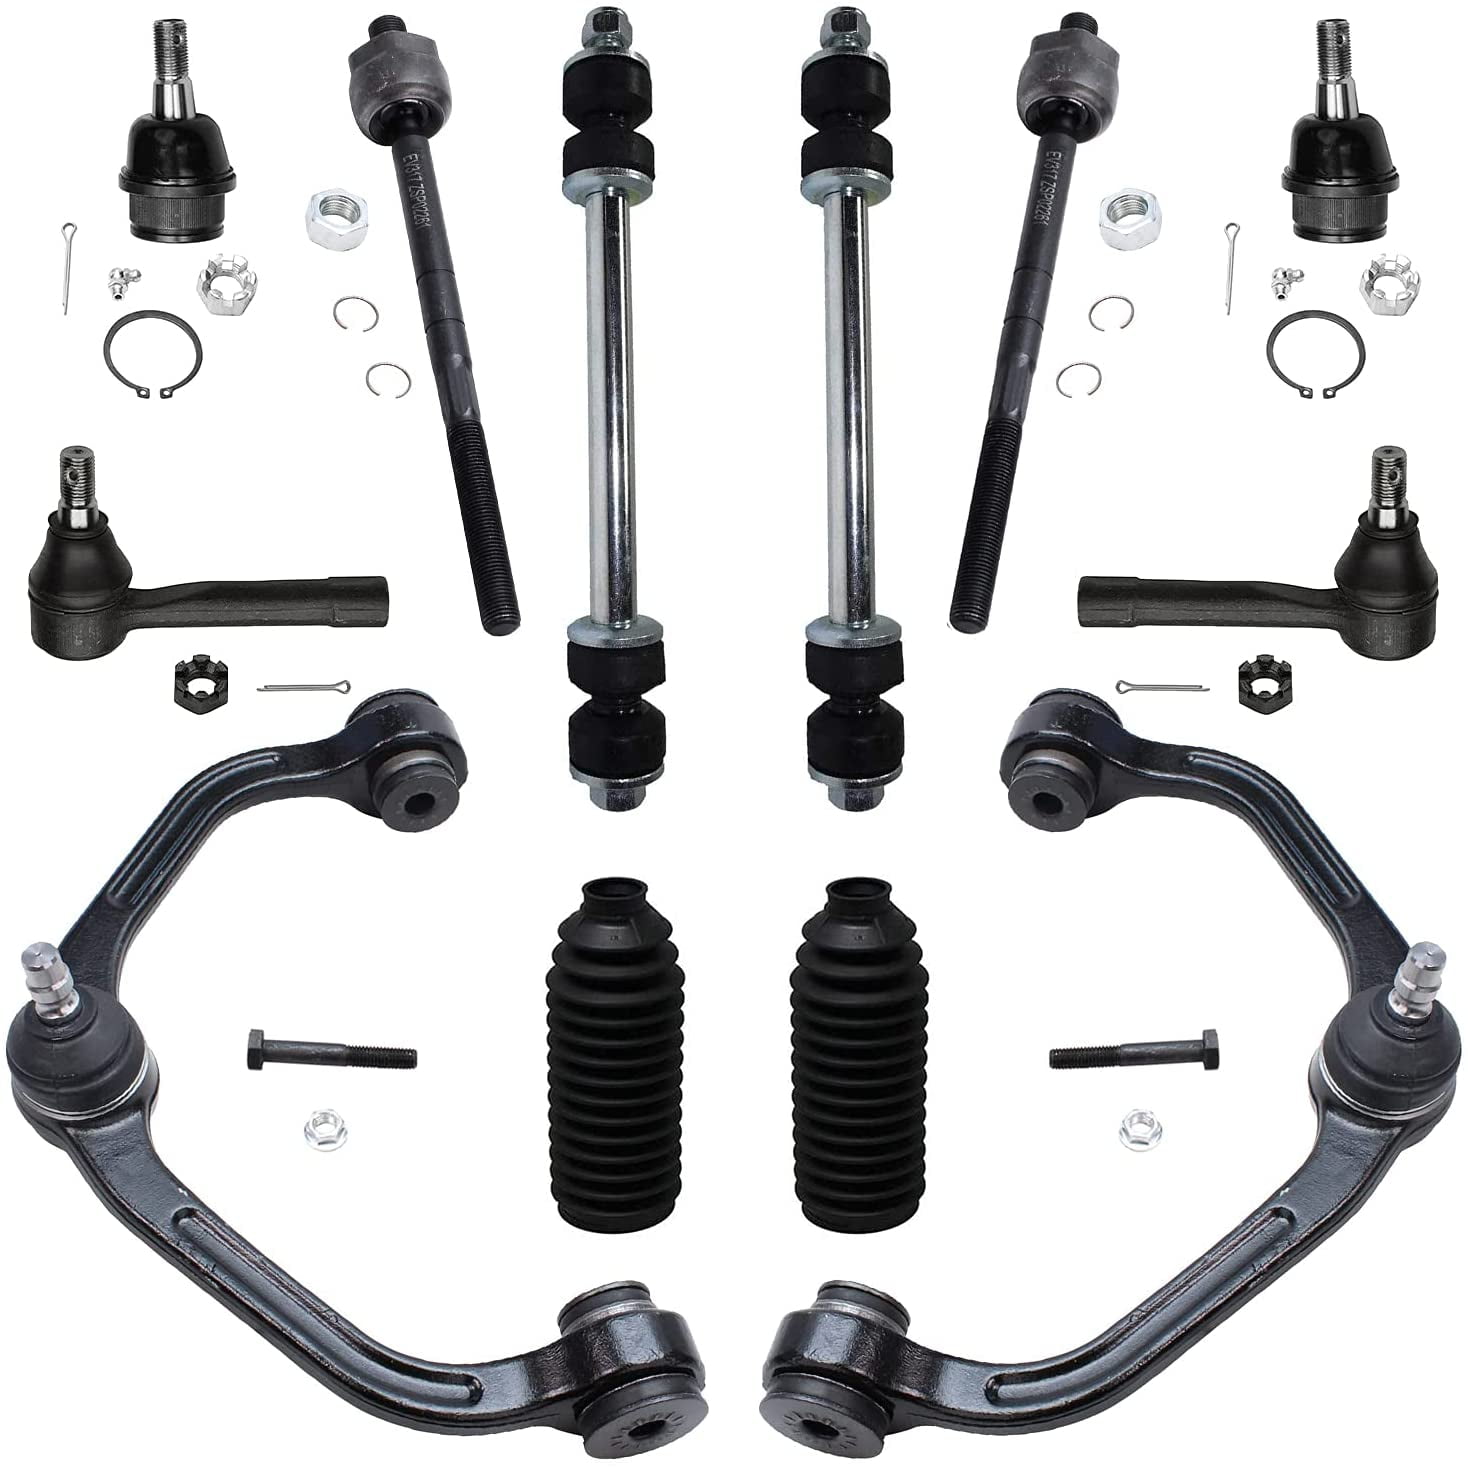 12 Pc Suspension Kit for Ford Ranger Mazda B2300 B2300 Ball Joint Tie Rod Ends